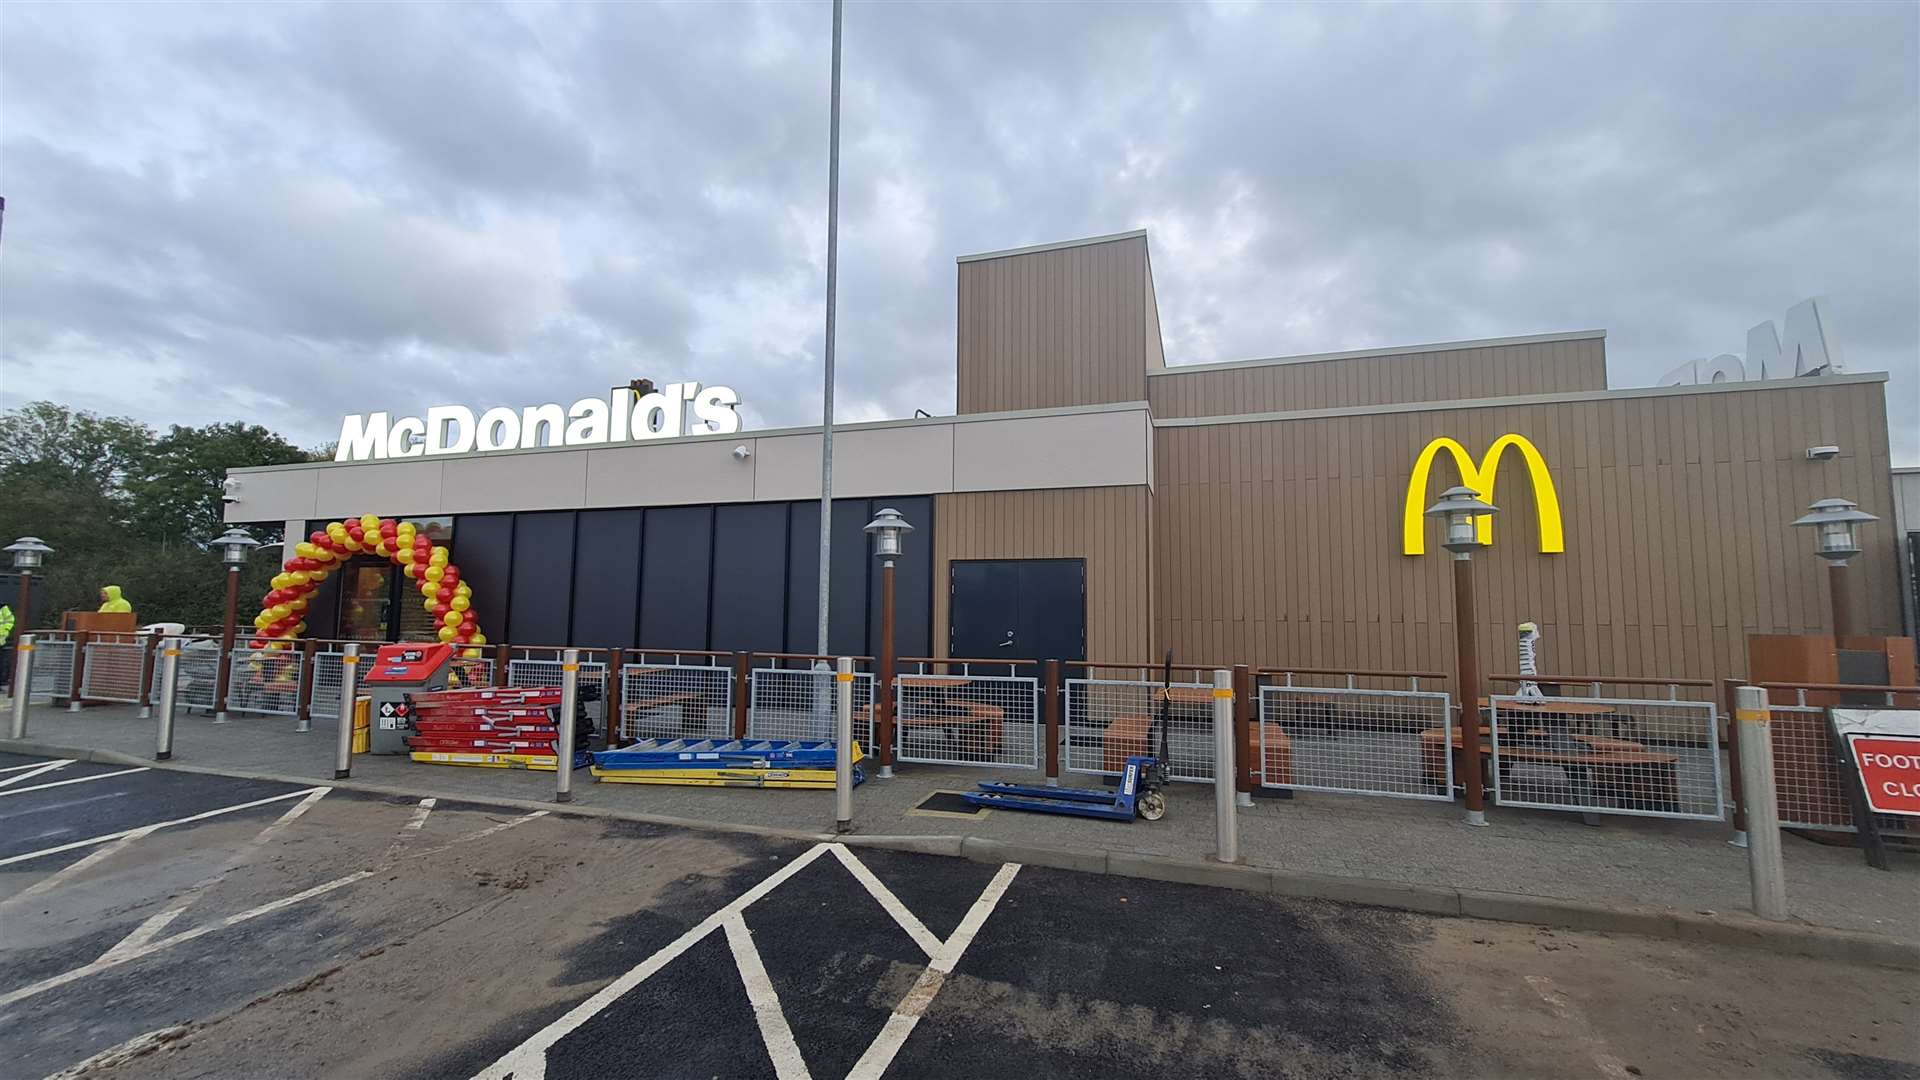 The new McDonald's at Sandwich ready for its launch